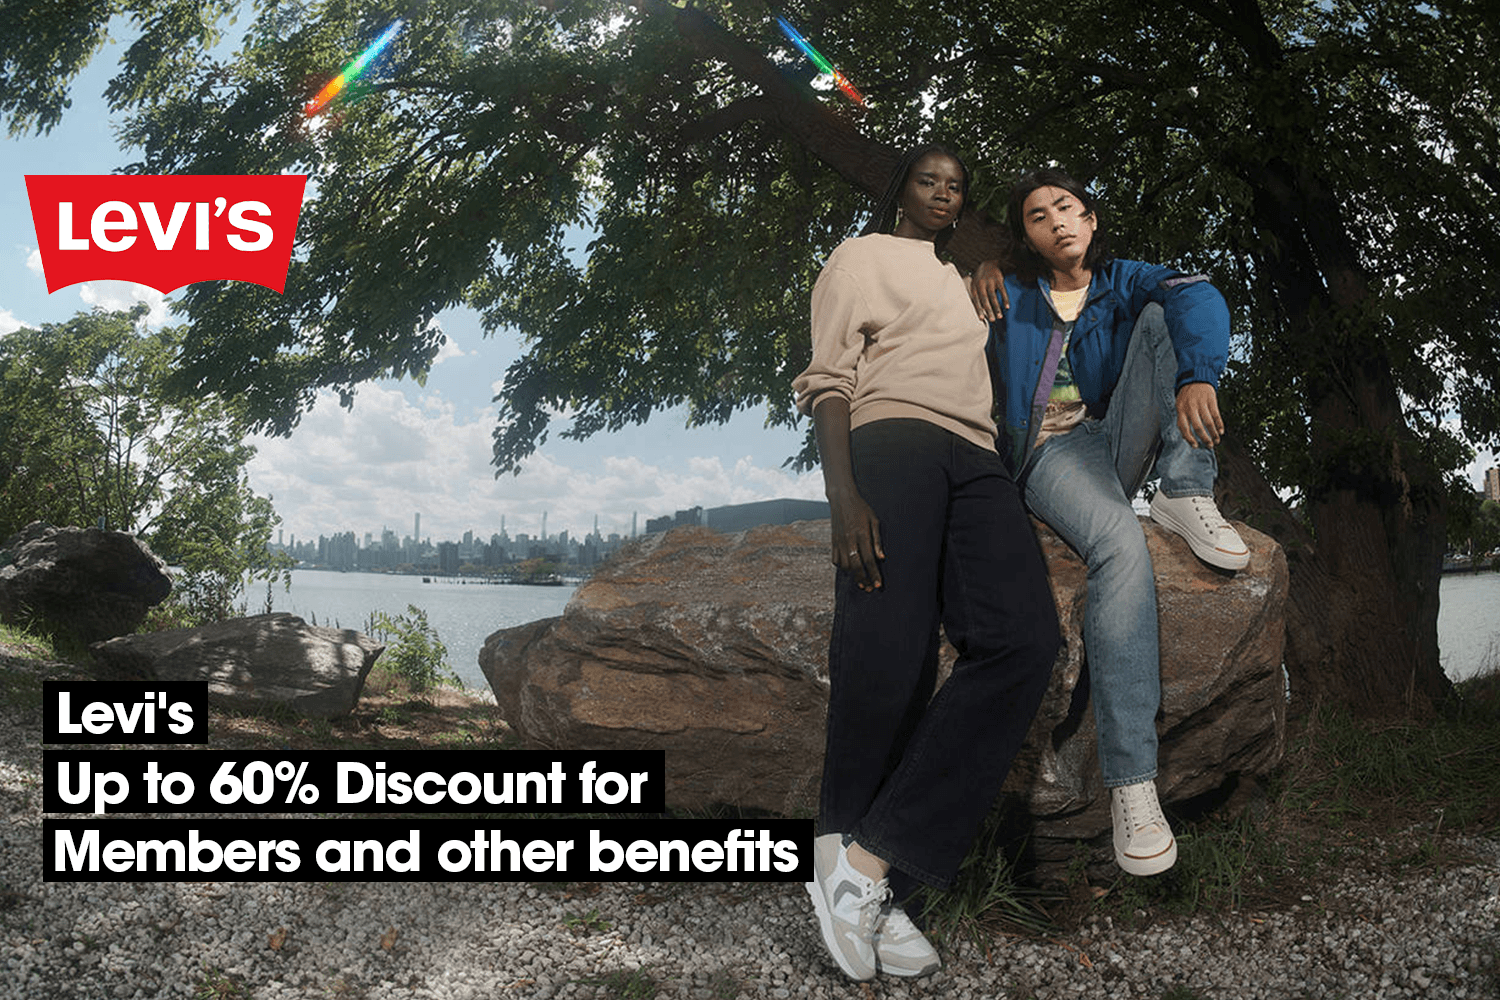 Levi's members get up to 60% discount and other benefits